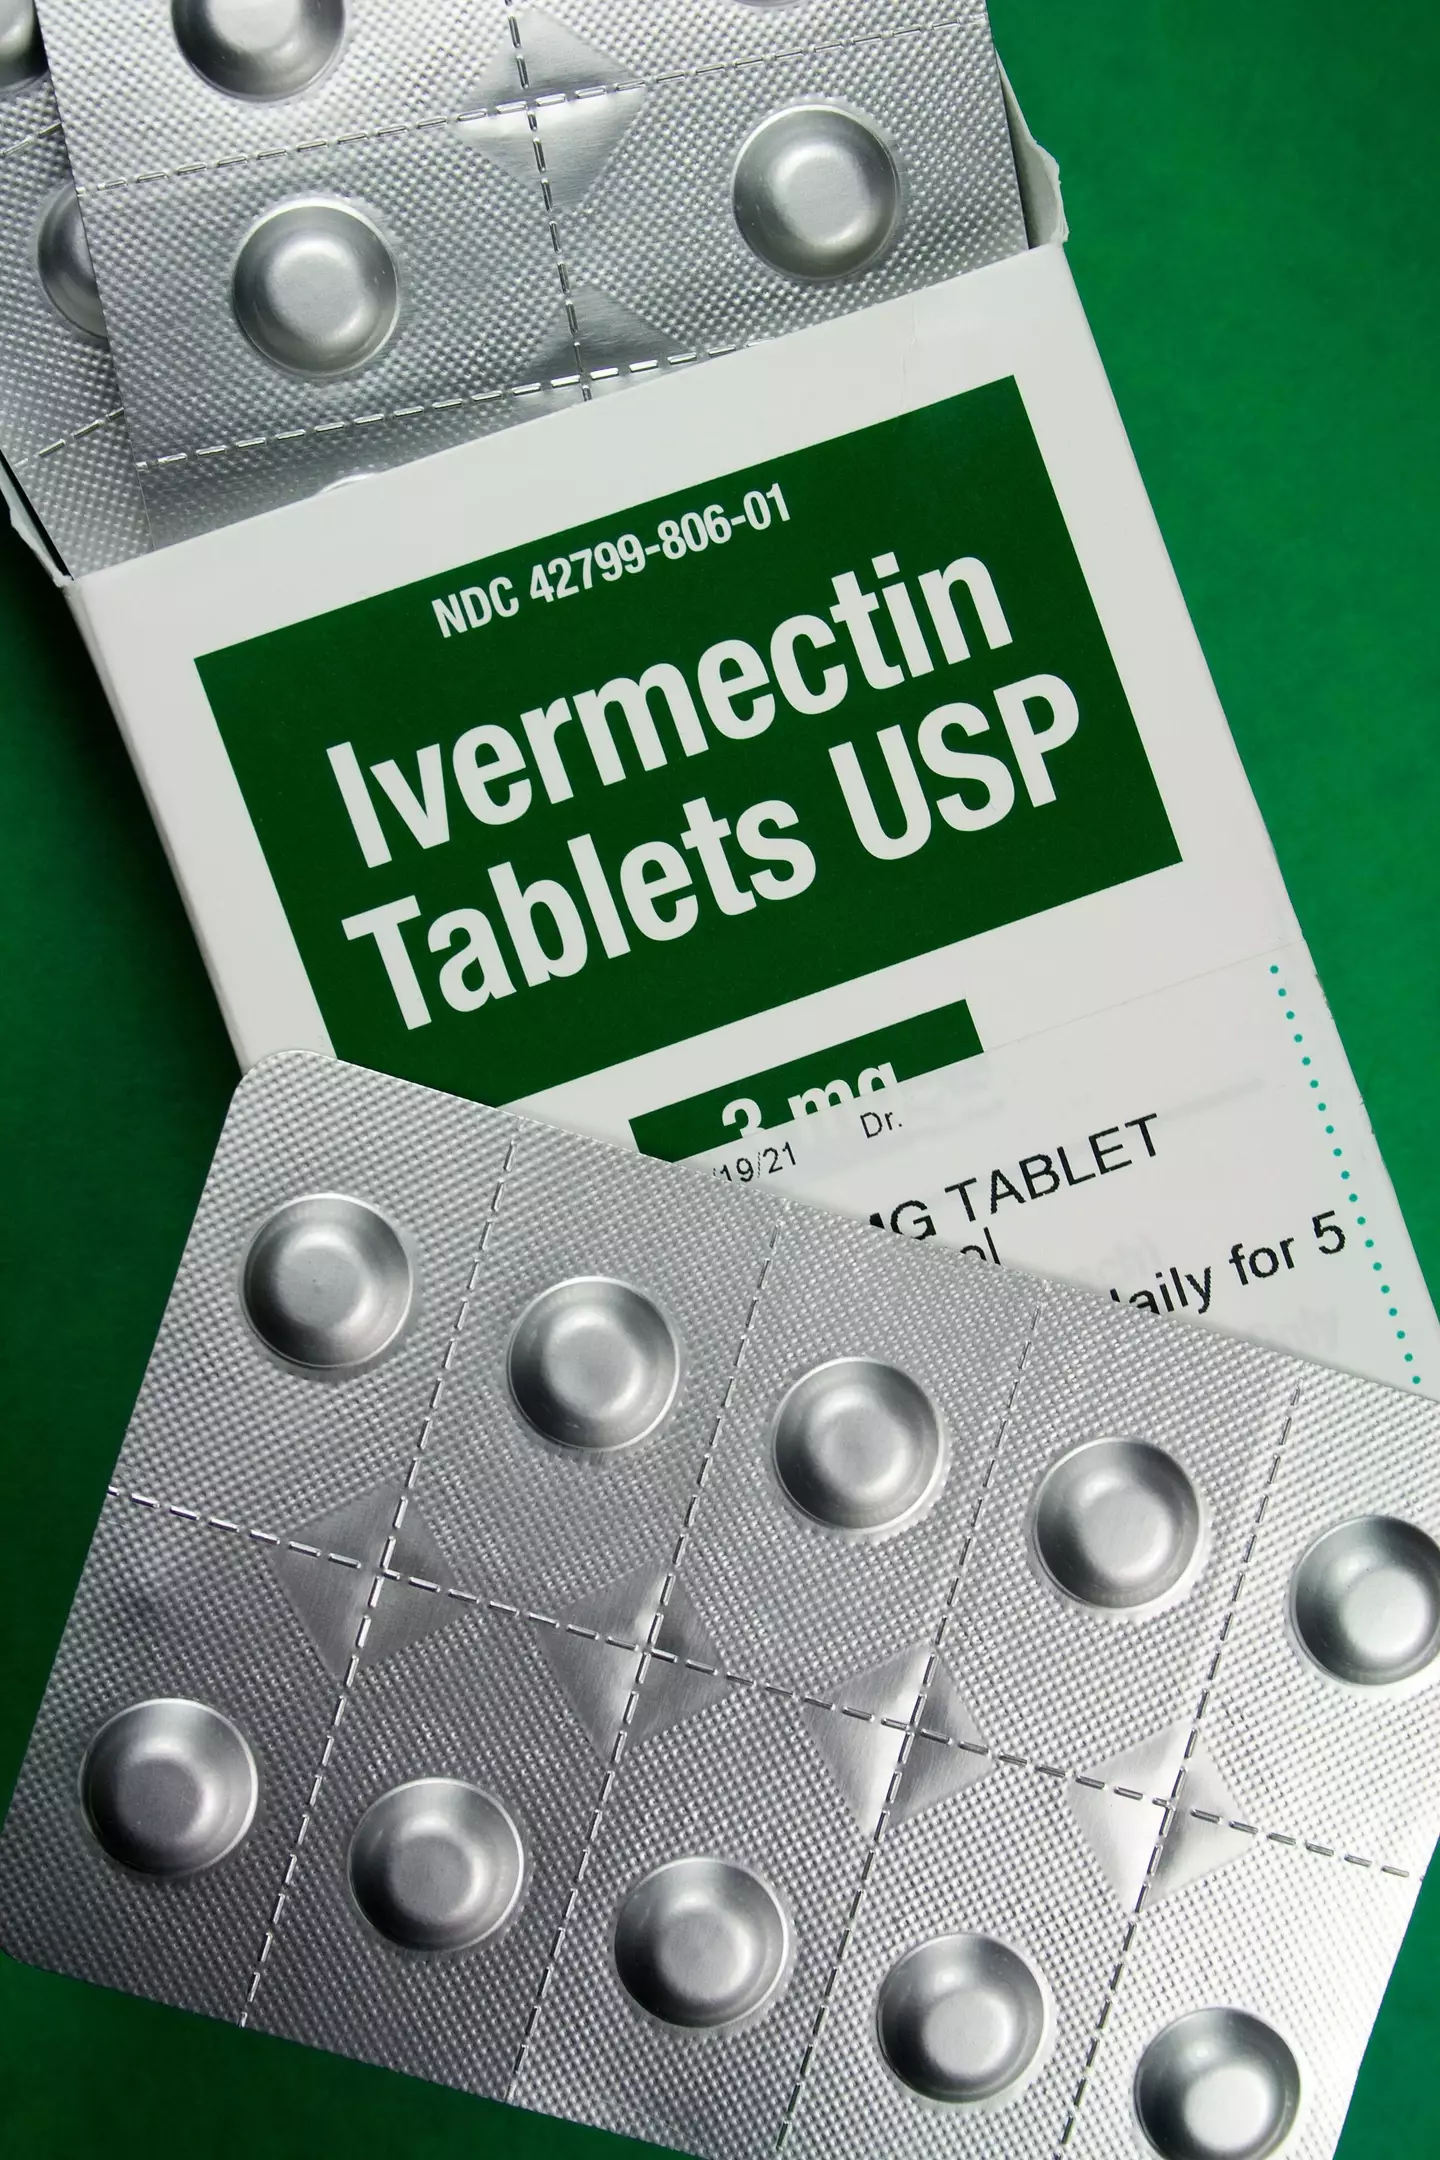 The FDA has warned against the use of ivermectin against Covid-19.